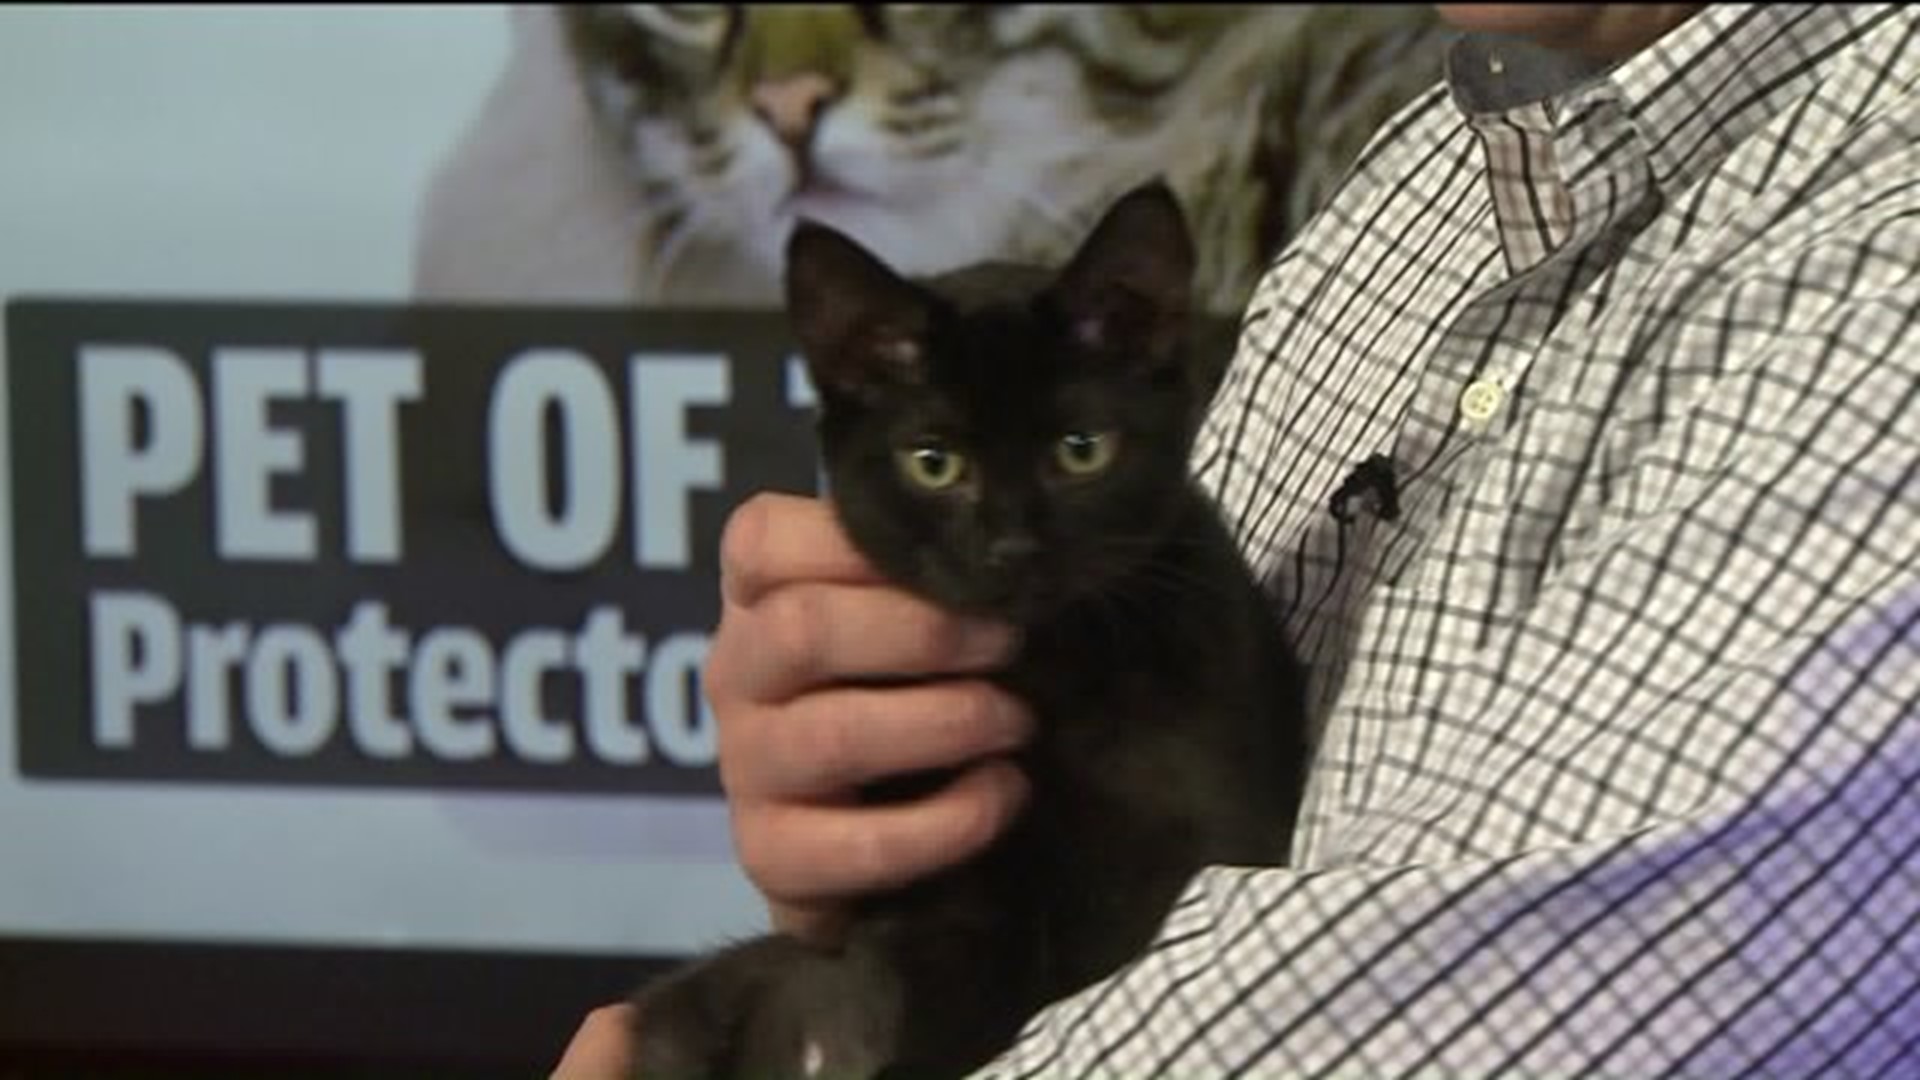 Pet of the week -Dylan